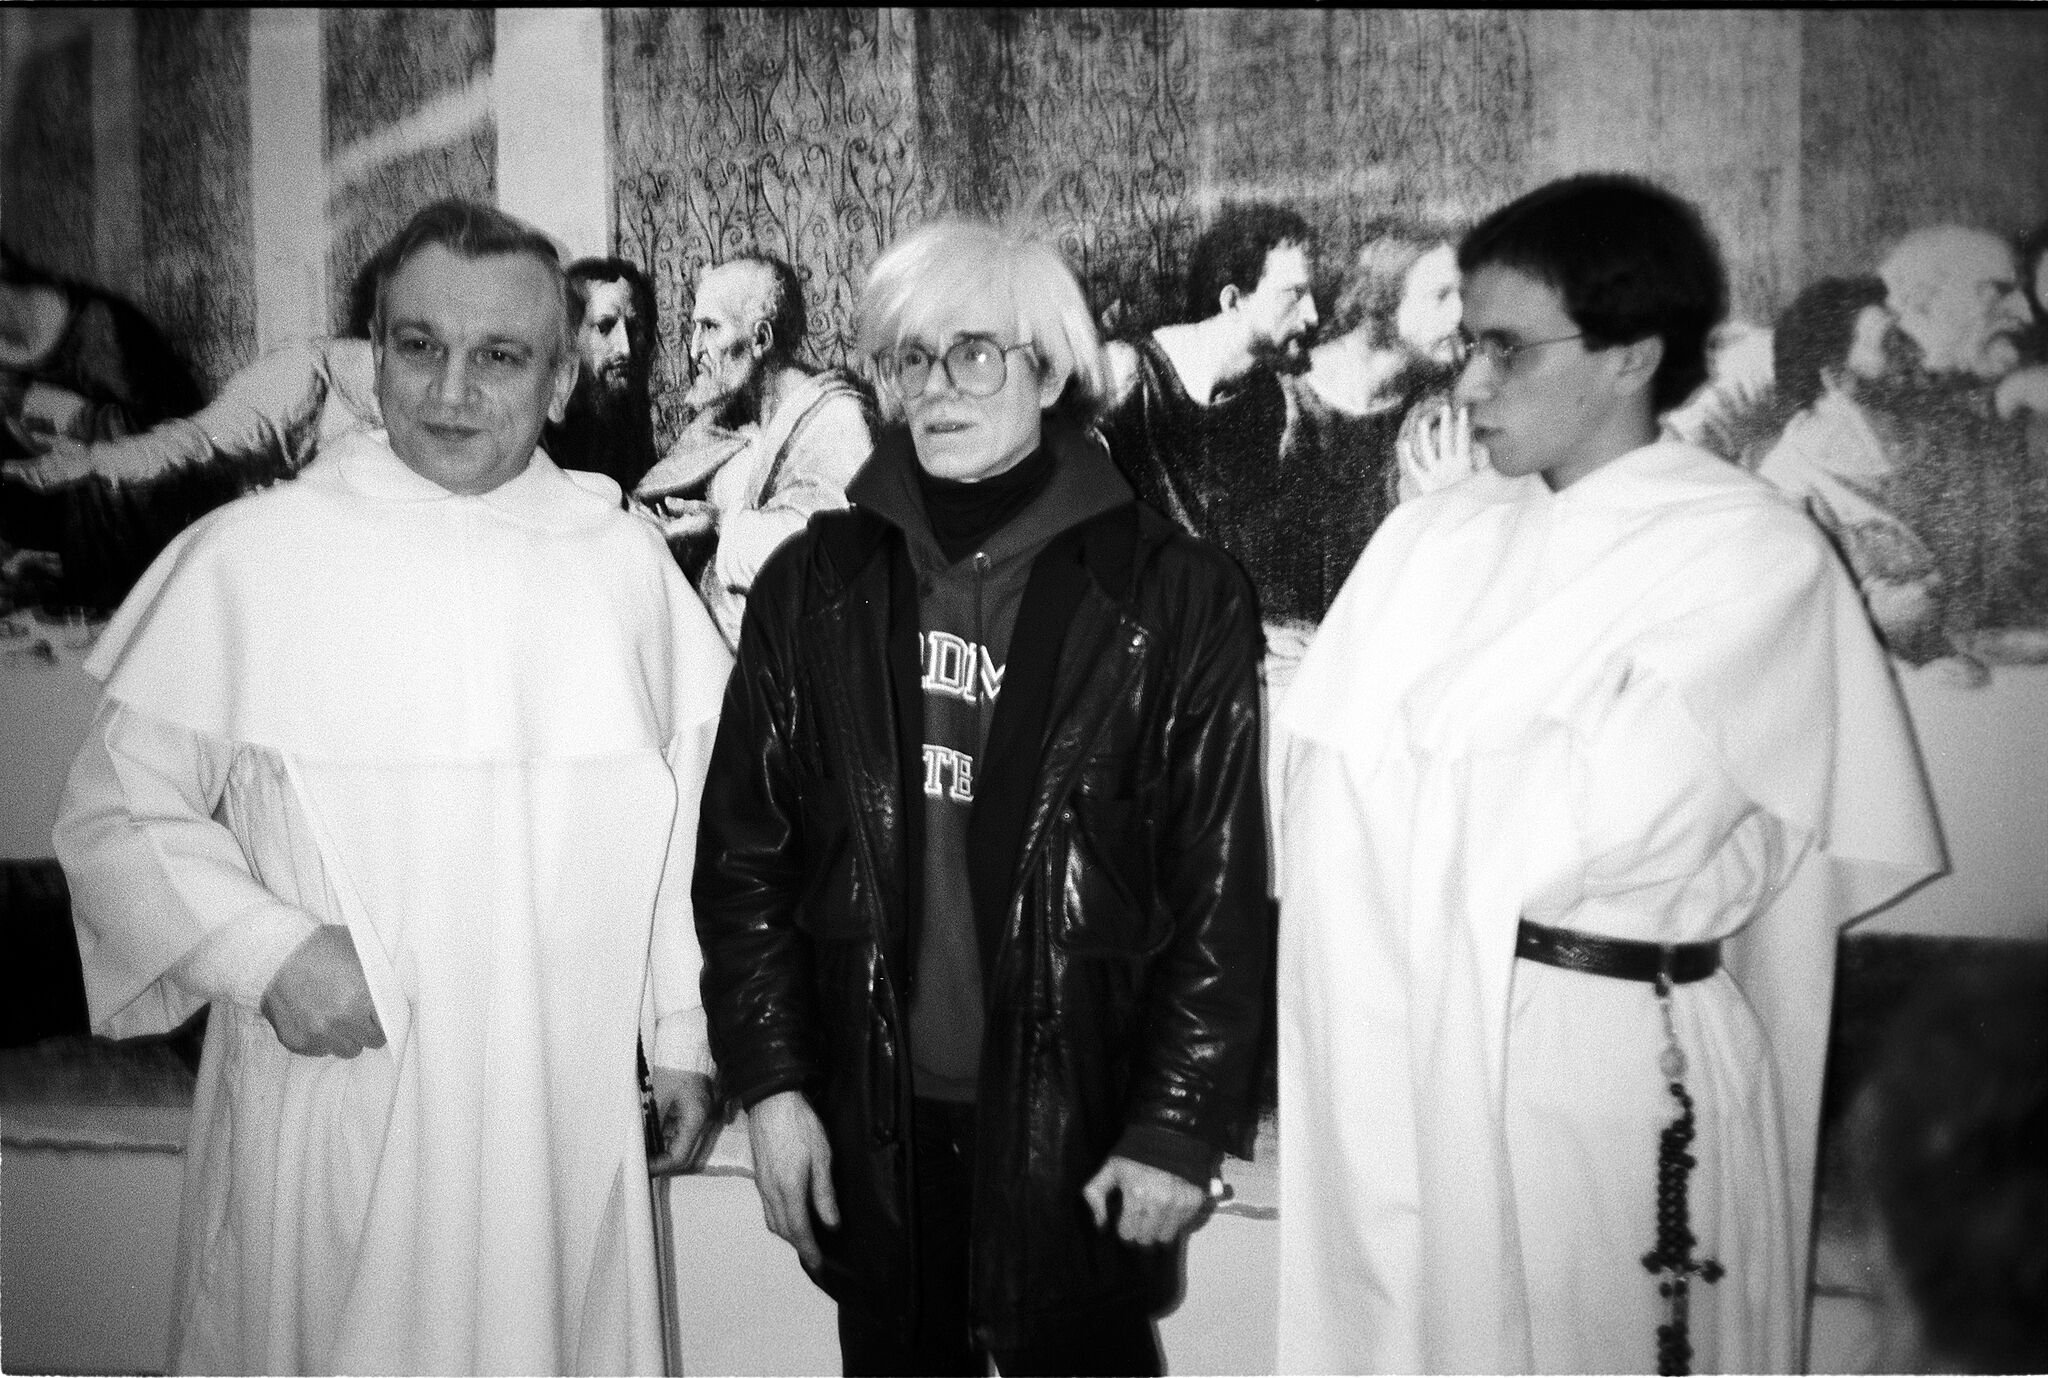 Andy Warhol standing in front of priests in Milan.